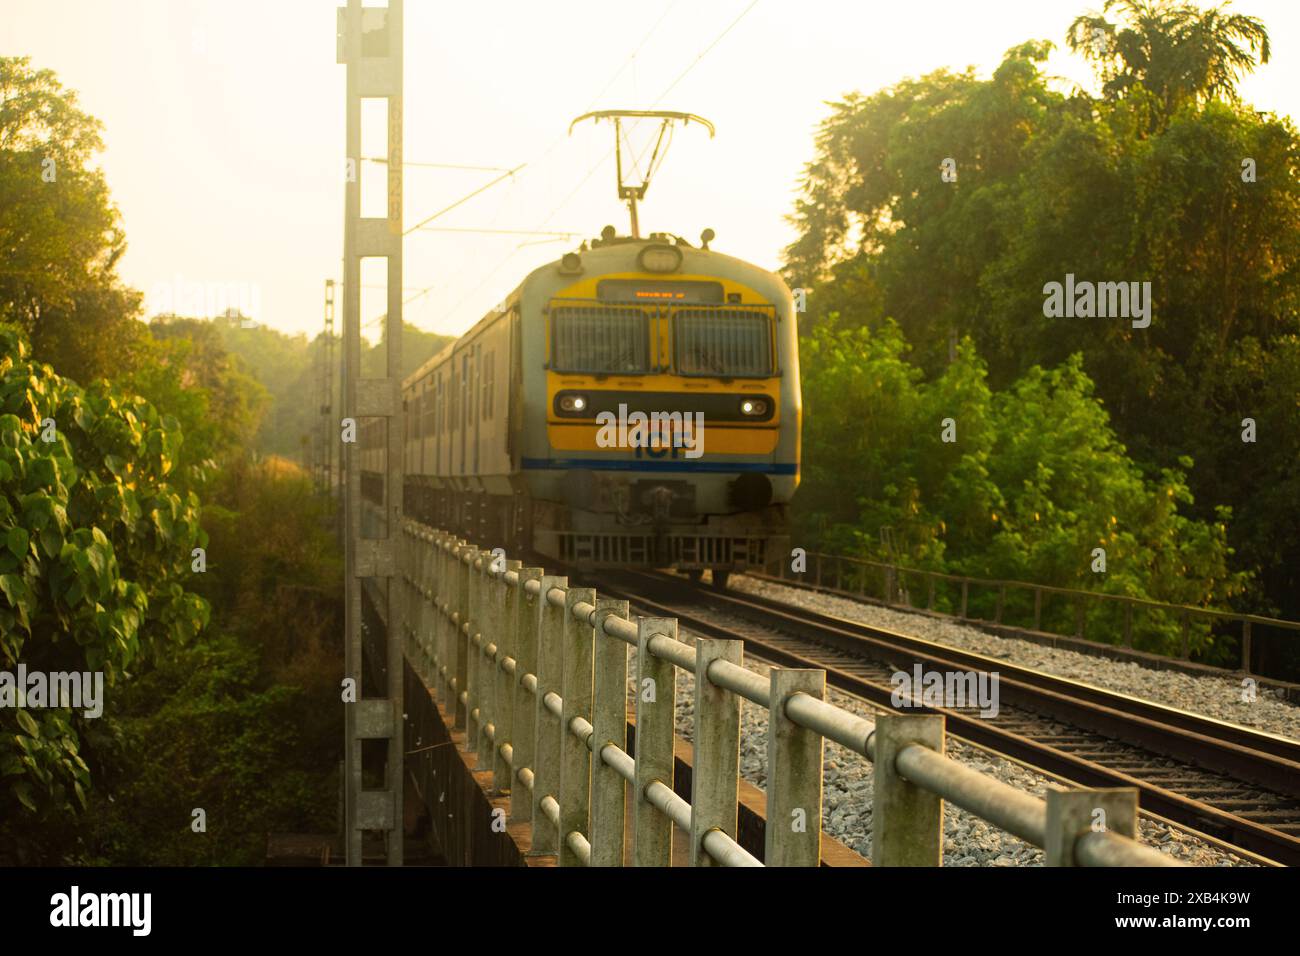 A local electric train makes its way through dense greenery, with passengers standing by the tracks, capturing the essence of everyday life and transp Stock Photo